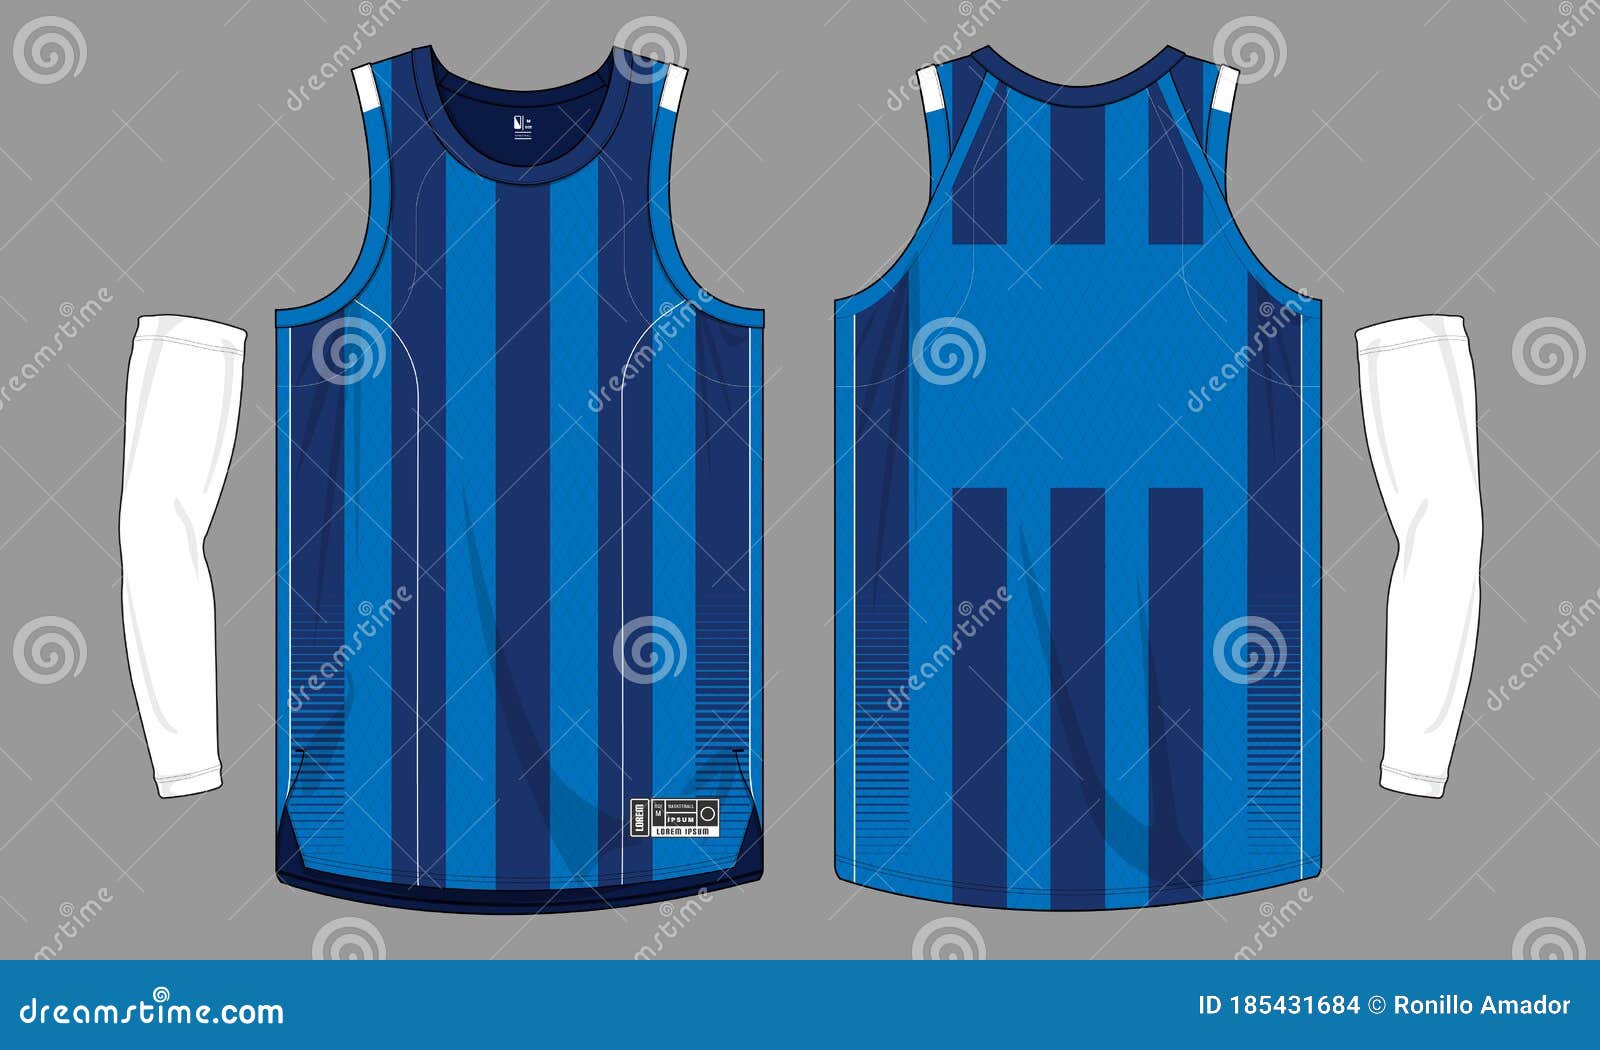 Basketball Jersey Uniform Template Mockup Isolated Stock Vector -  Illustration of apparel, graphic: 185355346